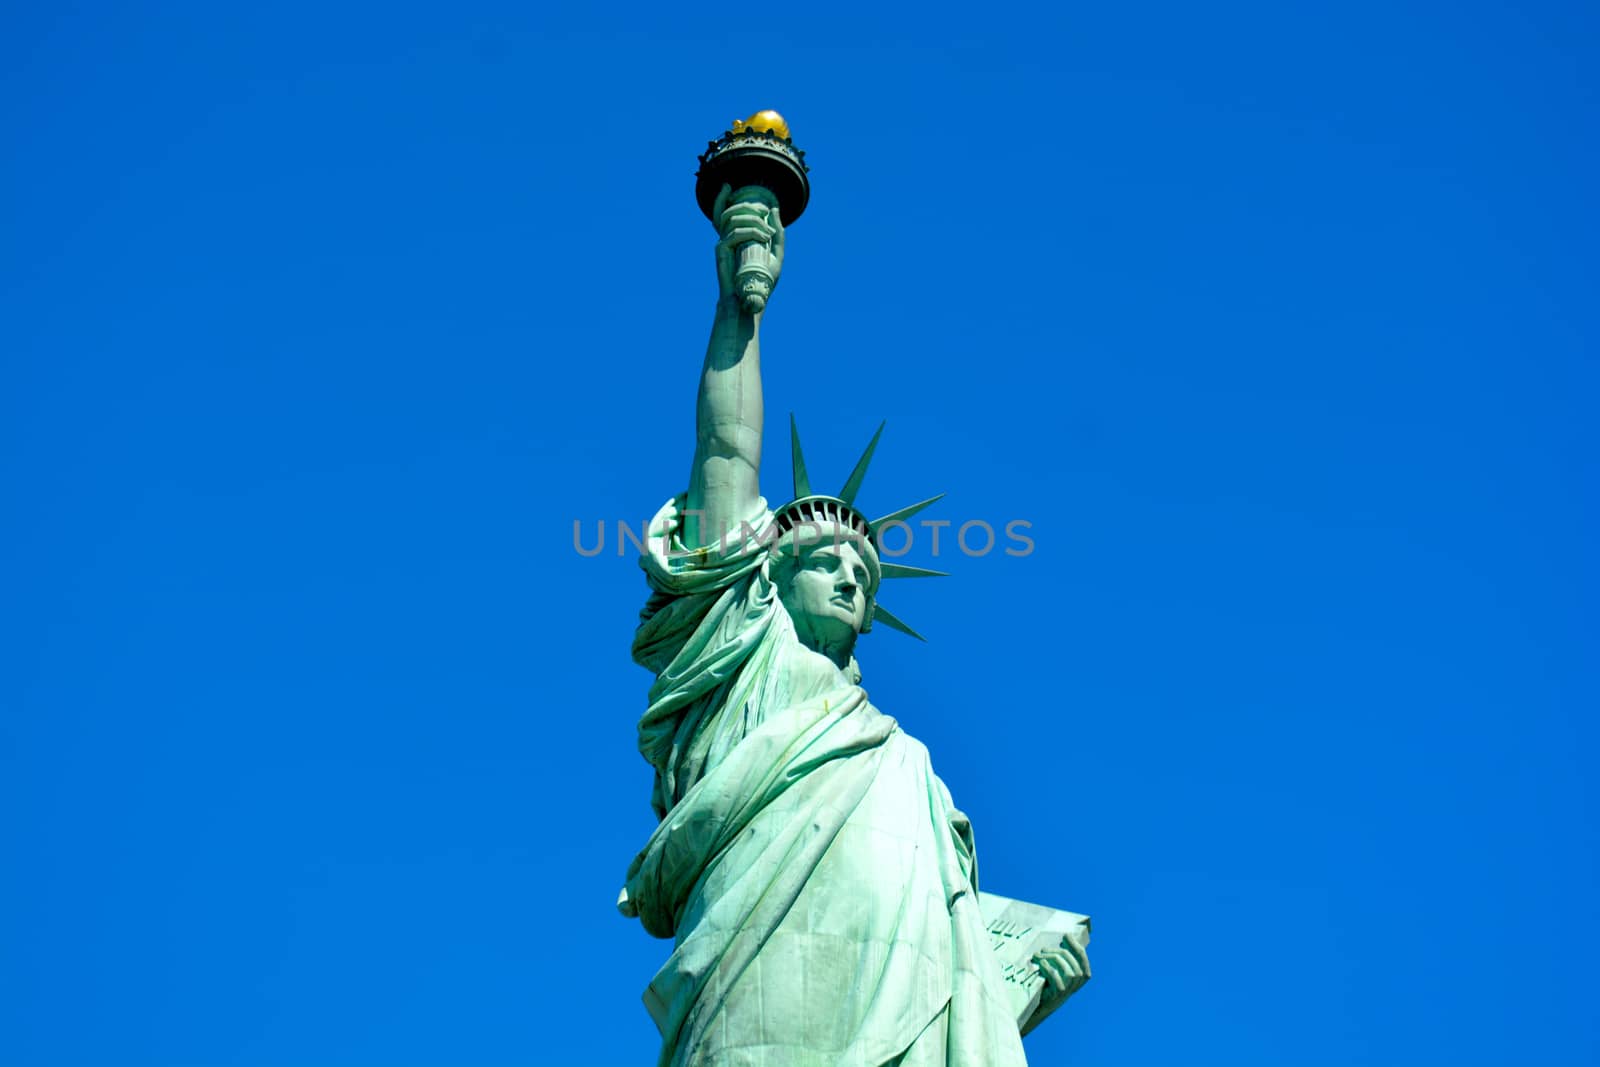 Statue of Liberty - New York City  - 55 by RefocusPhoto